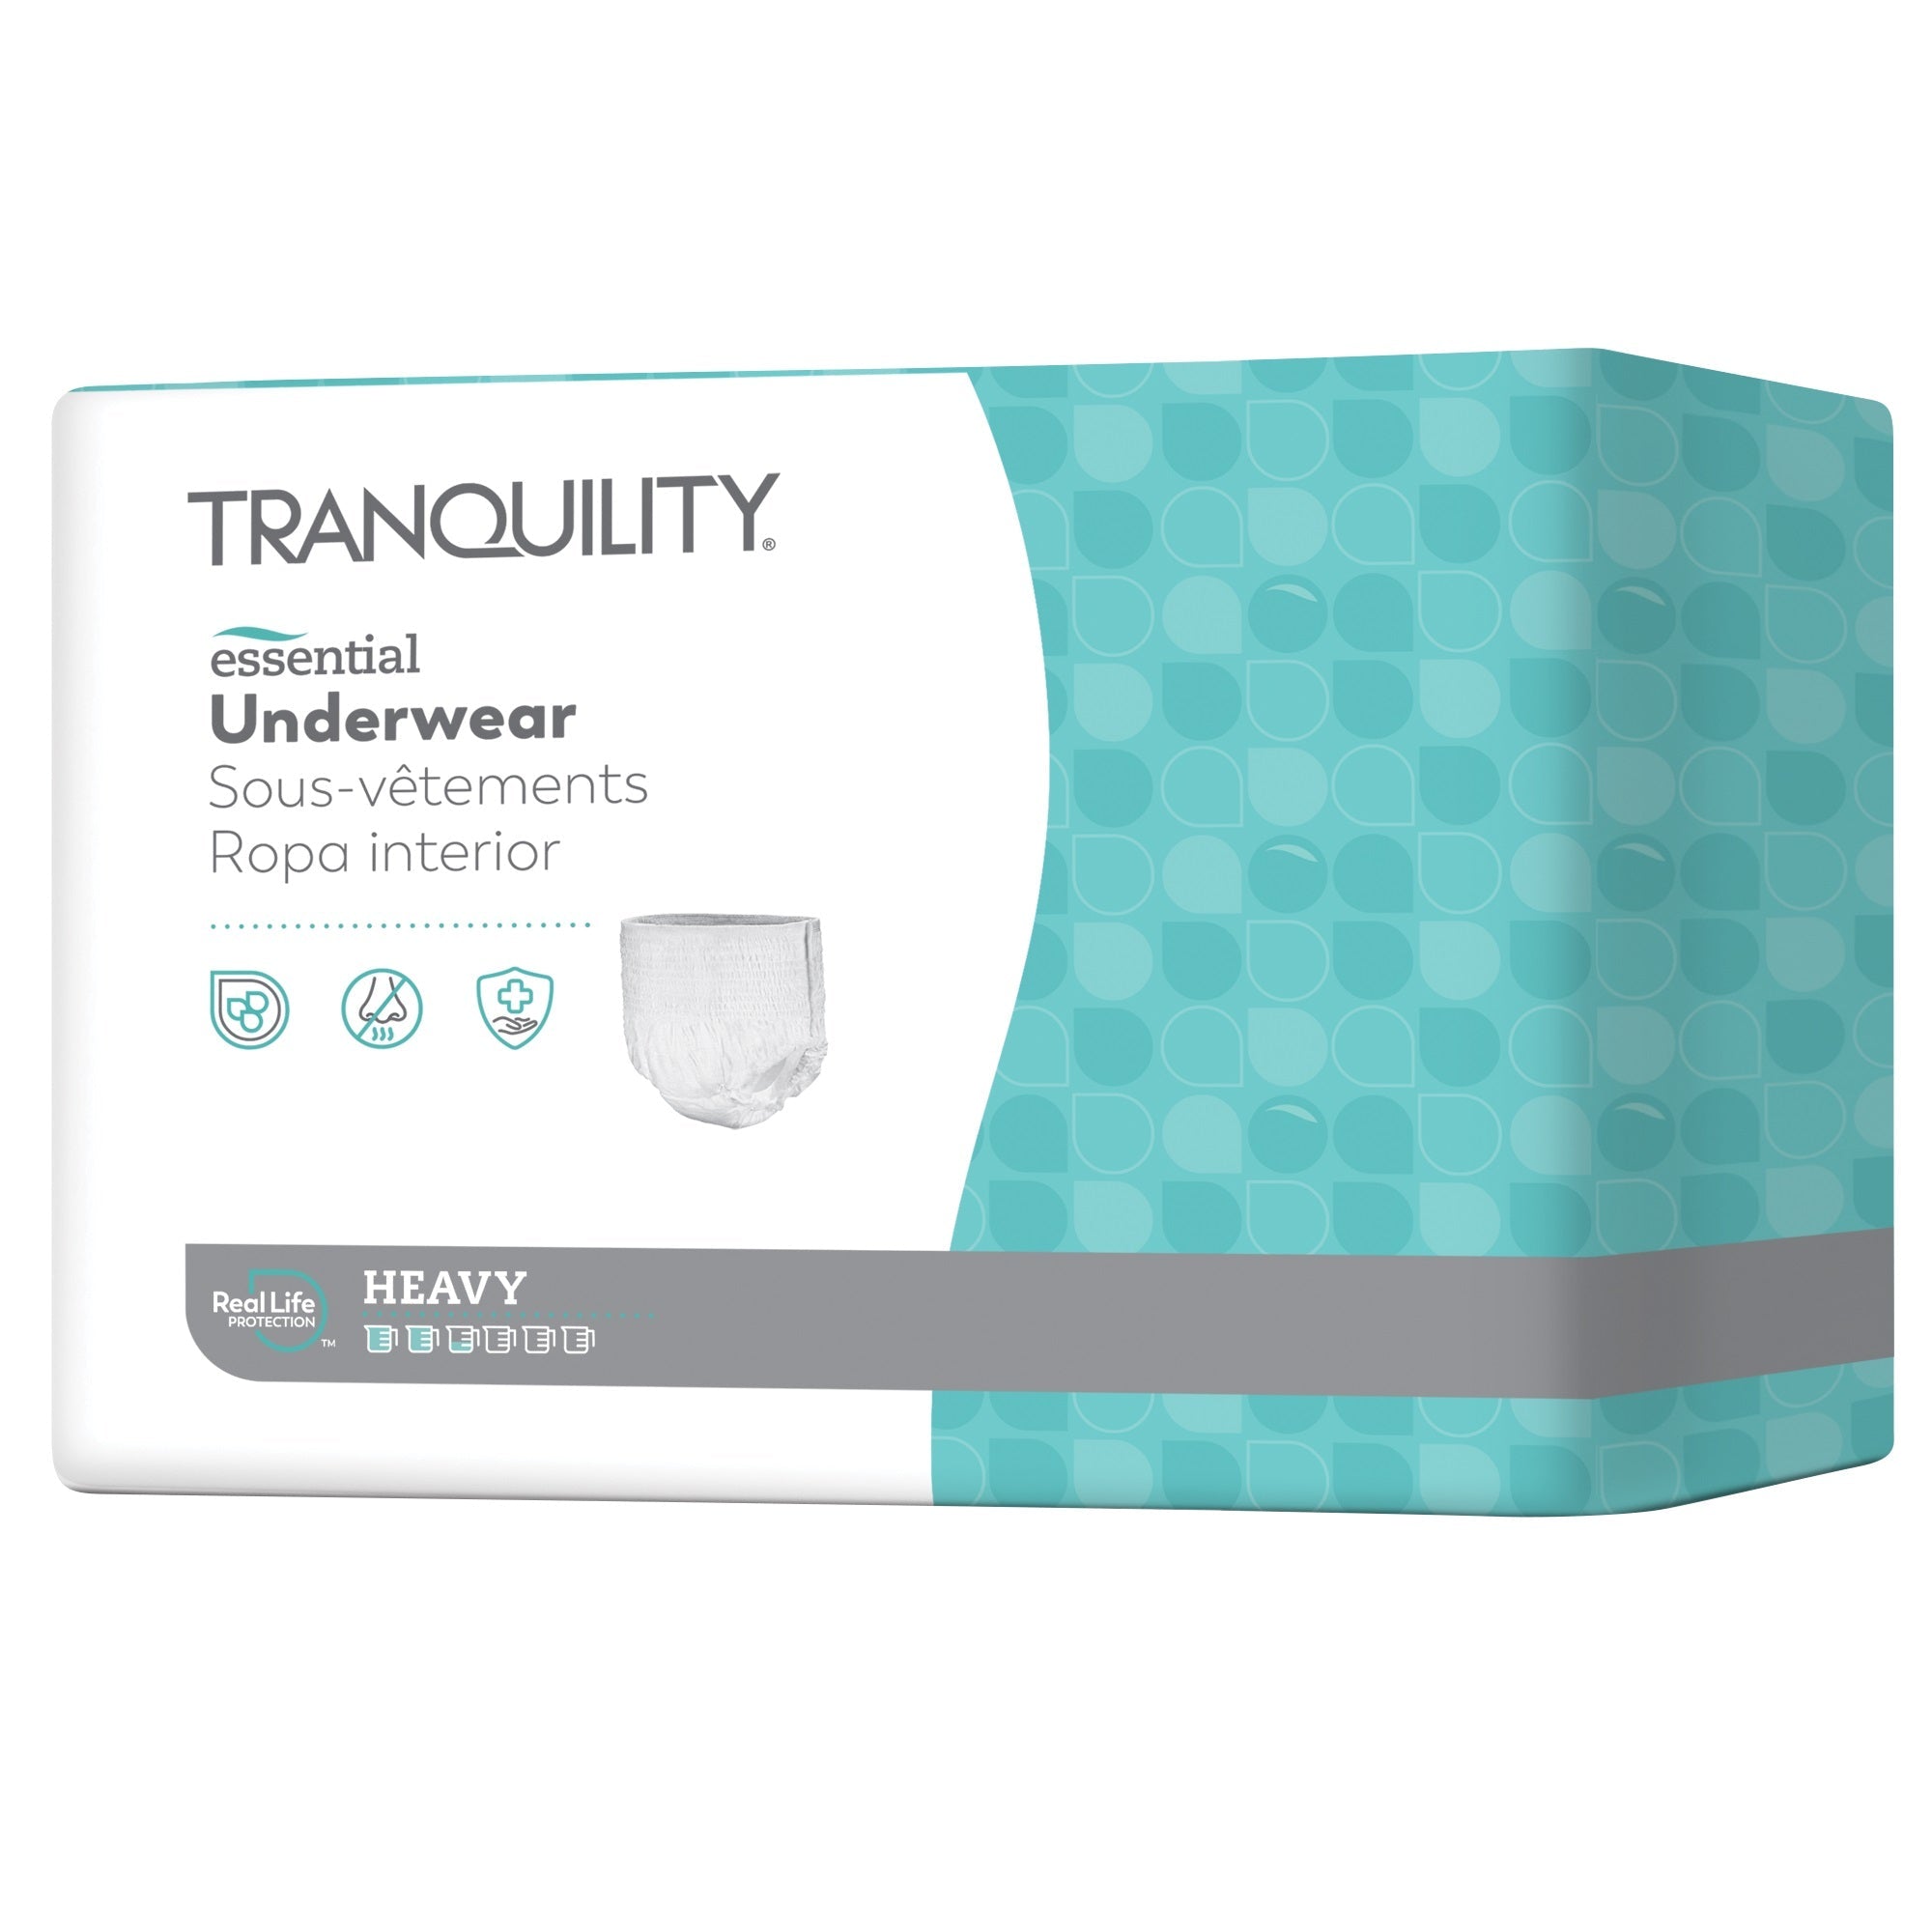 CA/56 - Tranquility® Select® Disposable Absorbent Underwear, 19 oz Fluid Capacity, XL (48" to 66" Waist/Hip, 210 to 250 lb) - Possible sub for PU2650 - Best Buy Medical Supplies